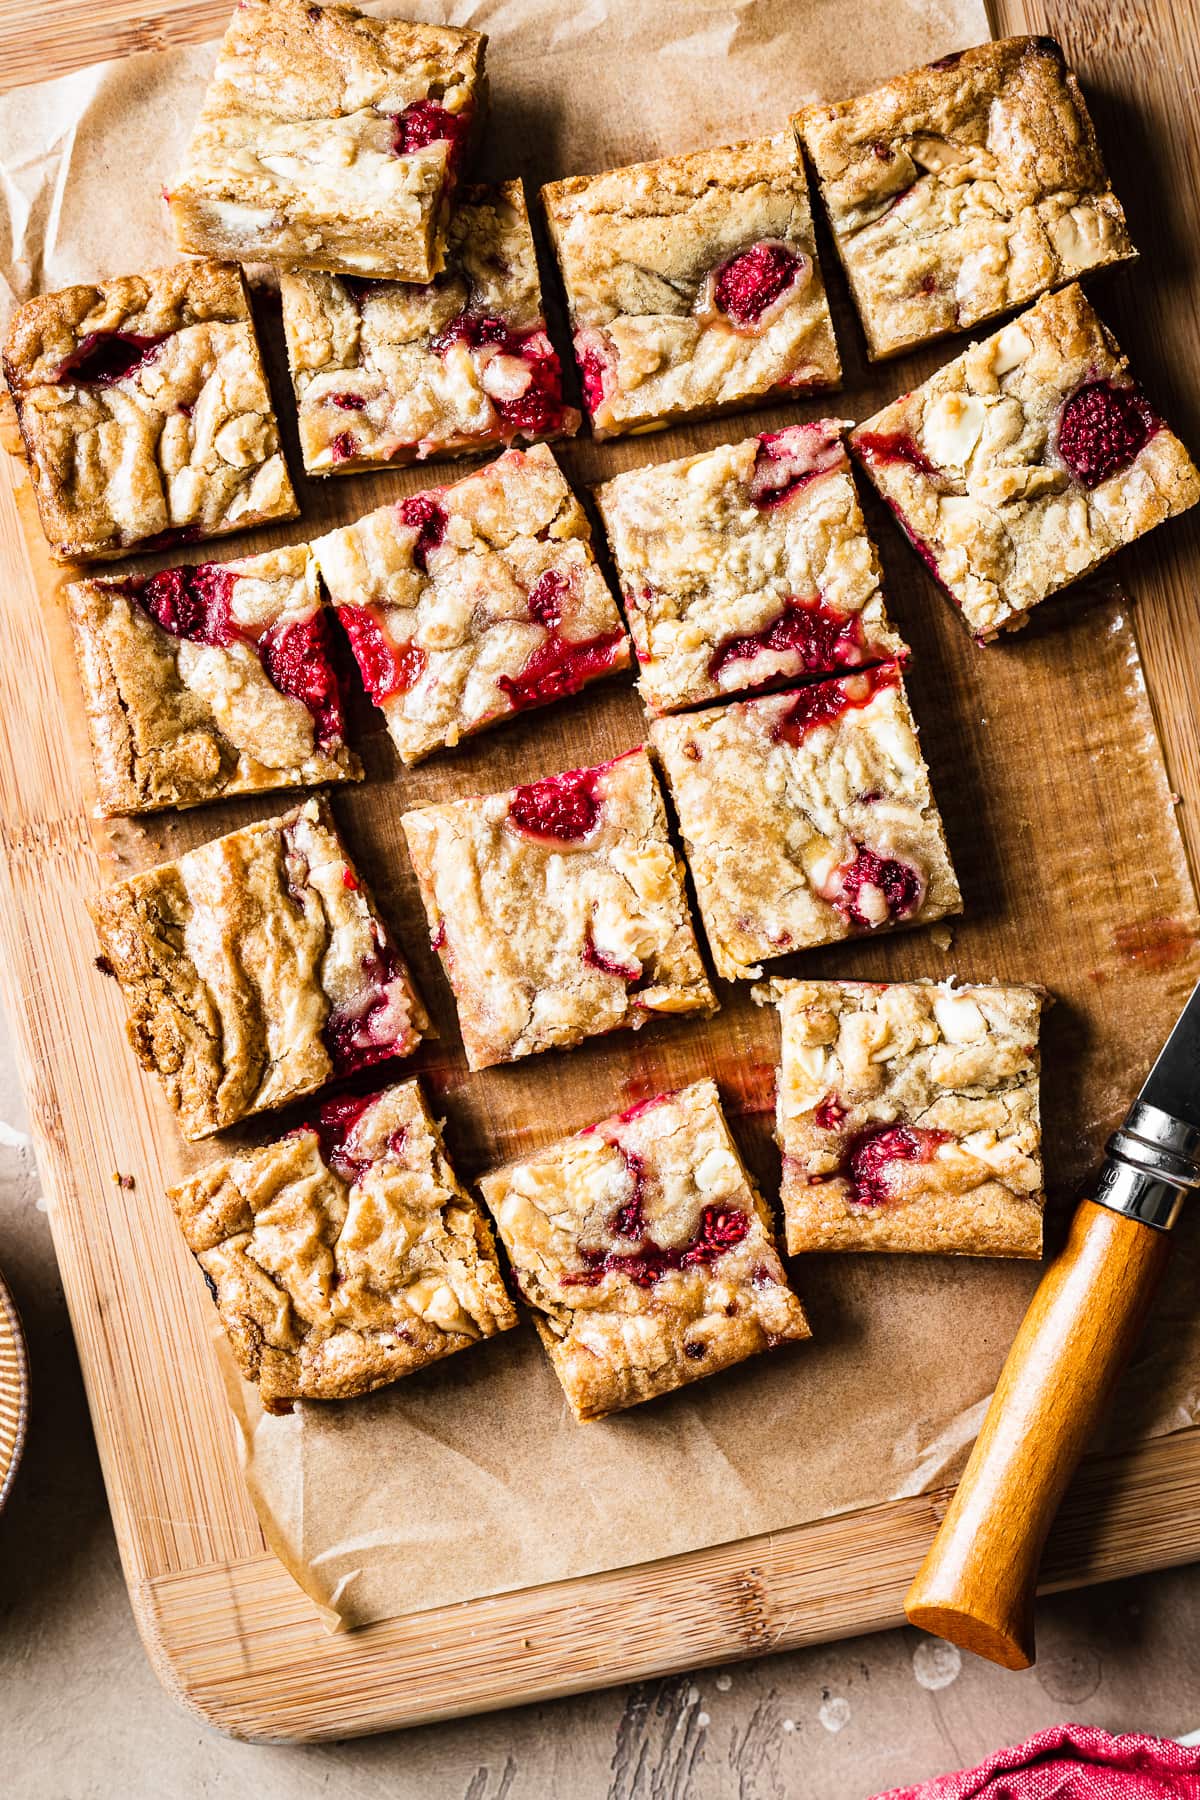 Bar cookies cut into squares on a wooden cutting board with knife resting nearby.